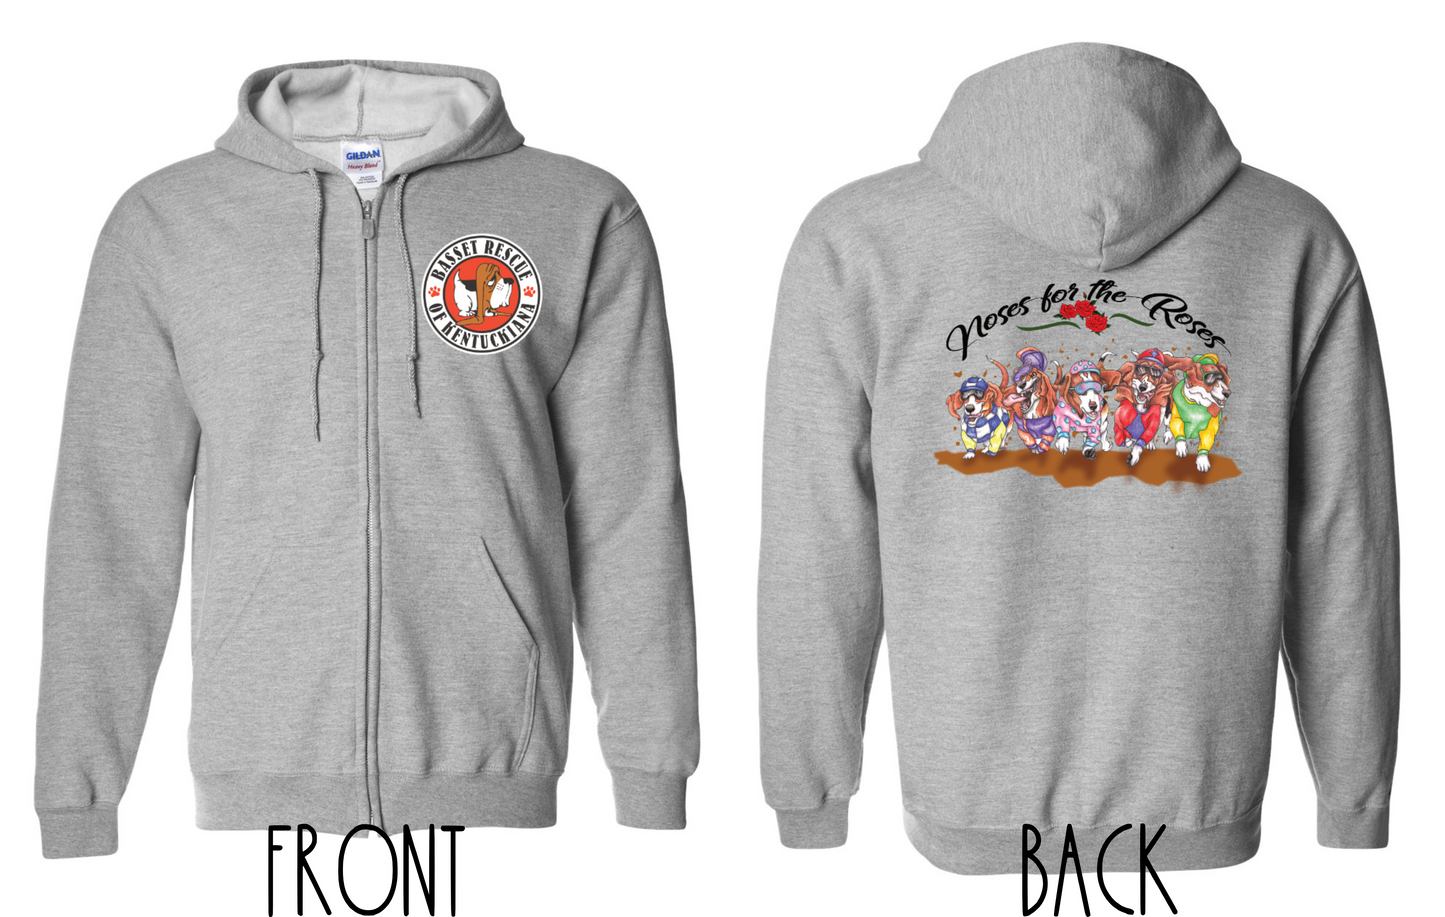 Noses for the Roses Zip Up Hoodies *3 COLORS*